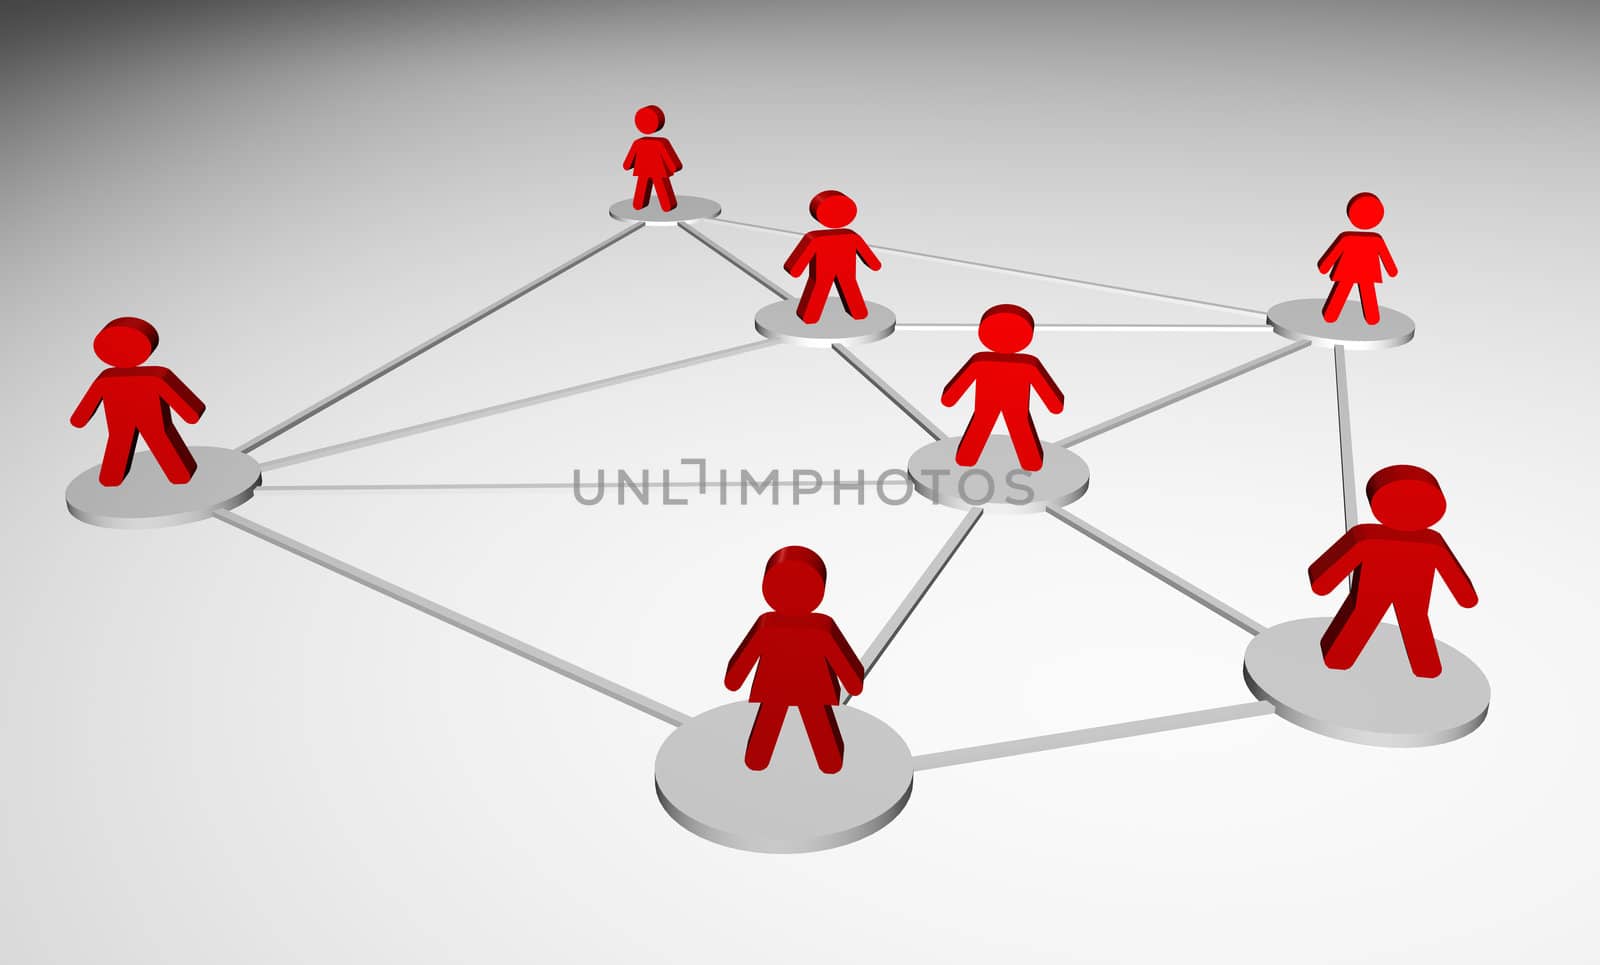 Illustration 3D rendered of the concept of people connected